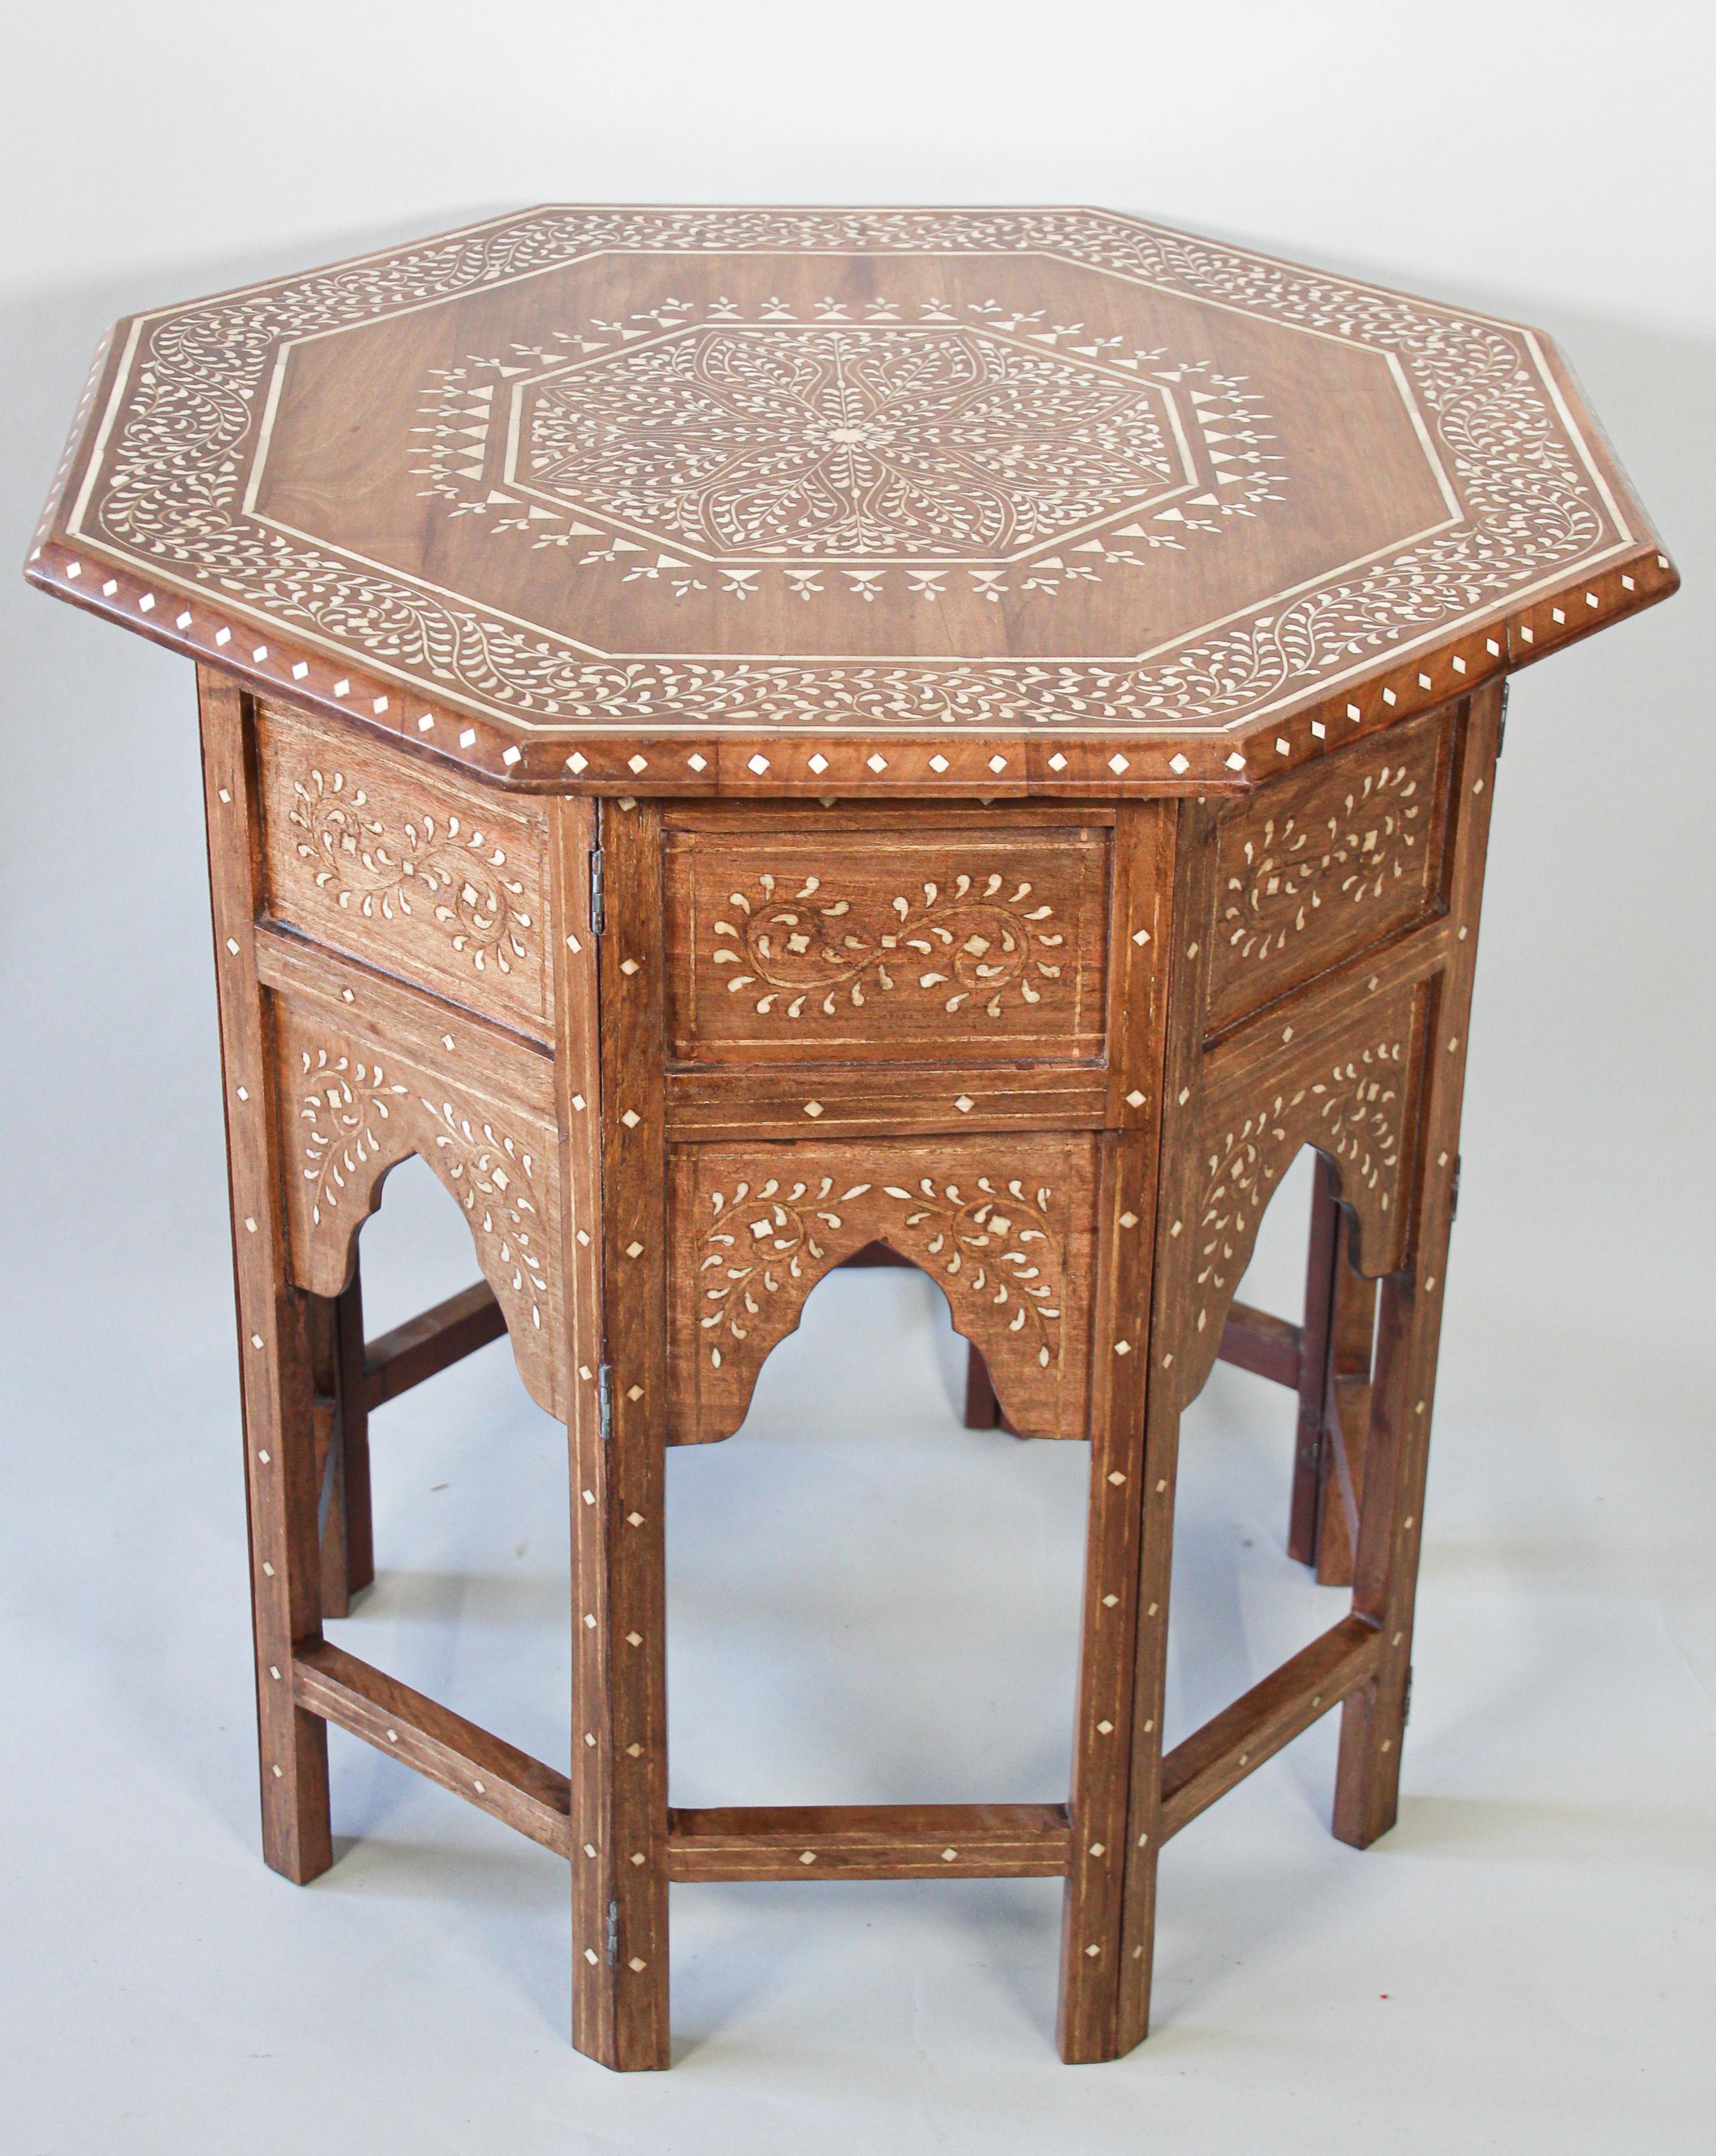 Vintage Fine and elegant Anglo Indian folding Moorish teak octagonal open arches side table.
Large Anglo-Indian wood end table finely carved and bone inlaid with scrolling details designs with open arch design panels at base.
Mughal Indian octagonal